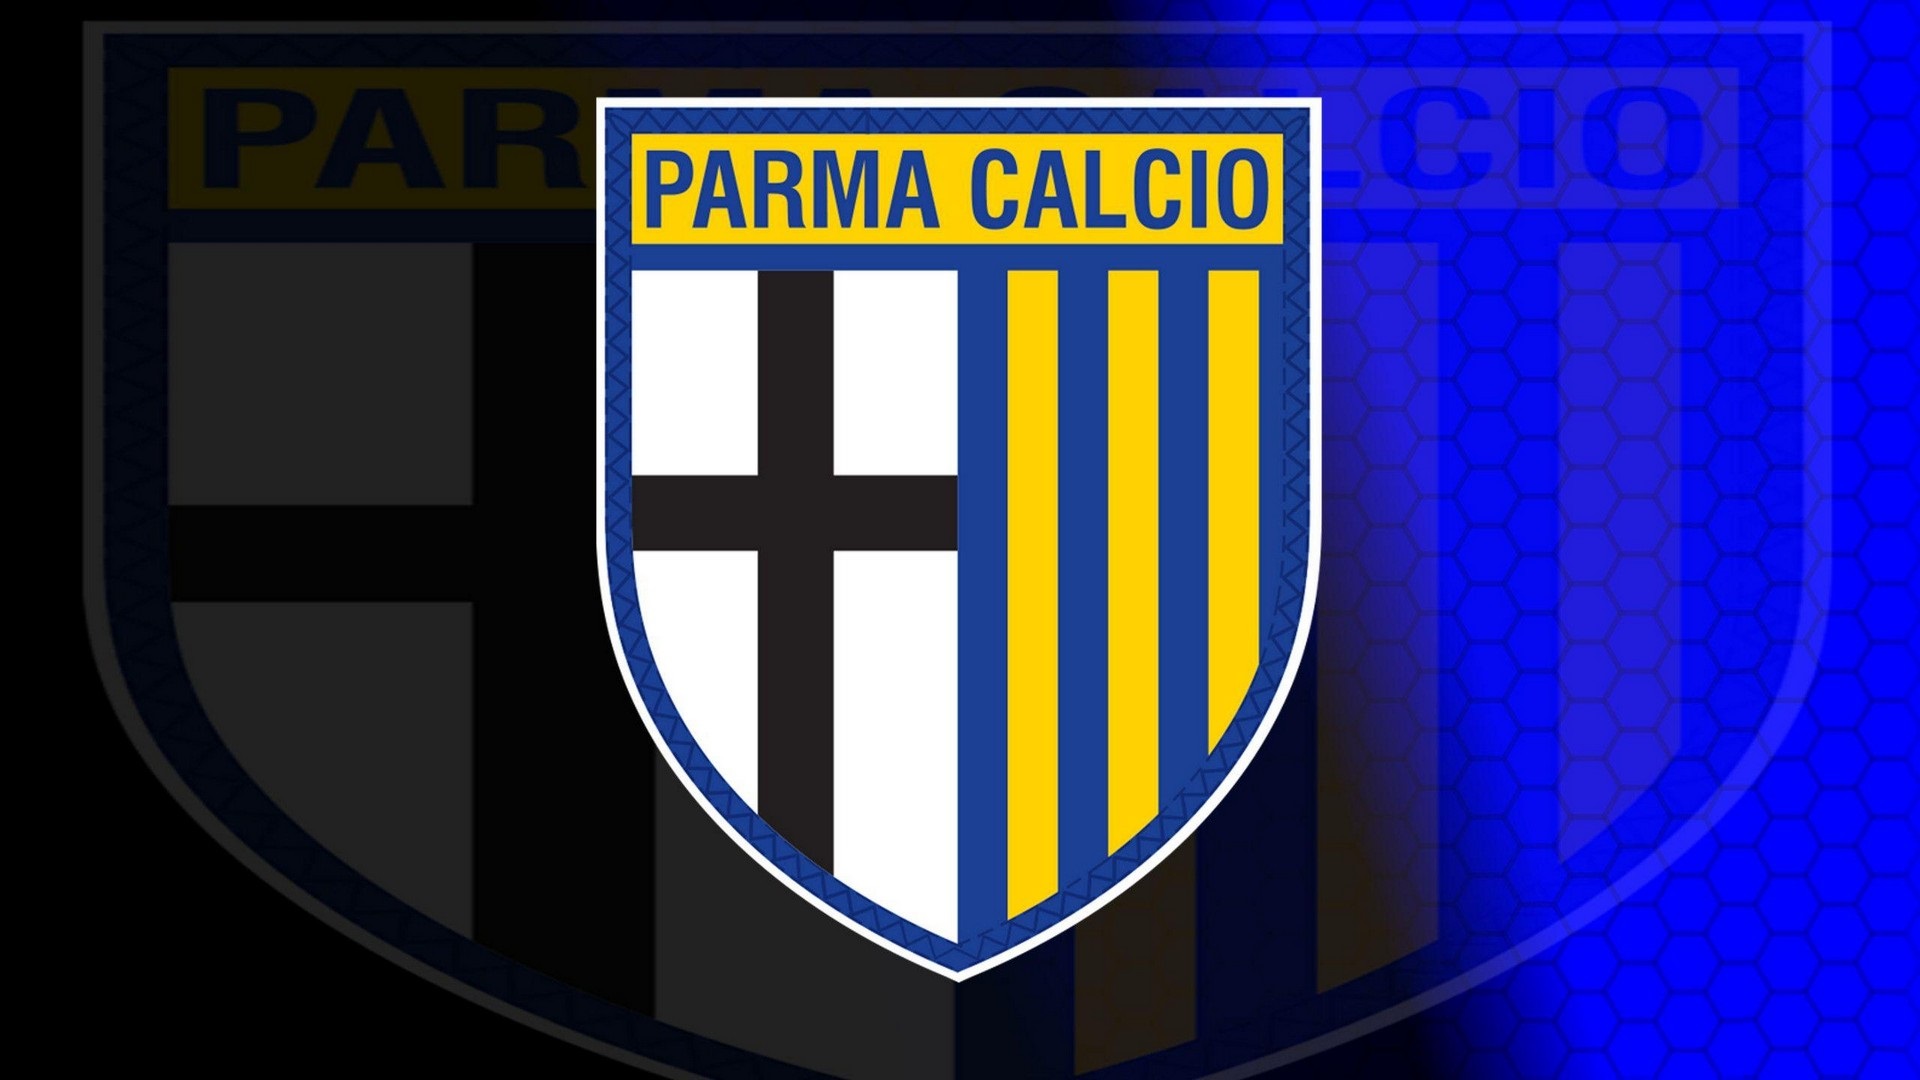 Parma Calcio 1913 Wallpaper HD with high-resolution 1920x1080 pixel. You can use this wallpaper for your Desktop Computers, Mac Screensavers, Windows Backgrounds, iPhone Wallpapers, Tablet or Android Lock screen and another Mobile device